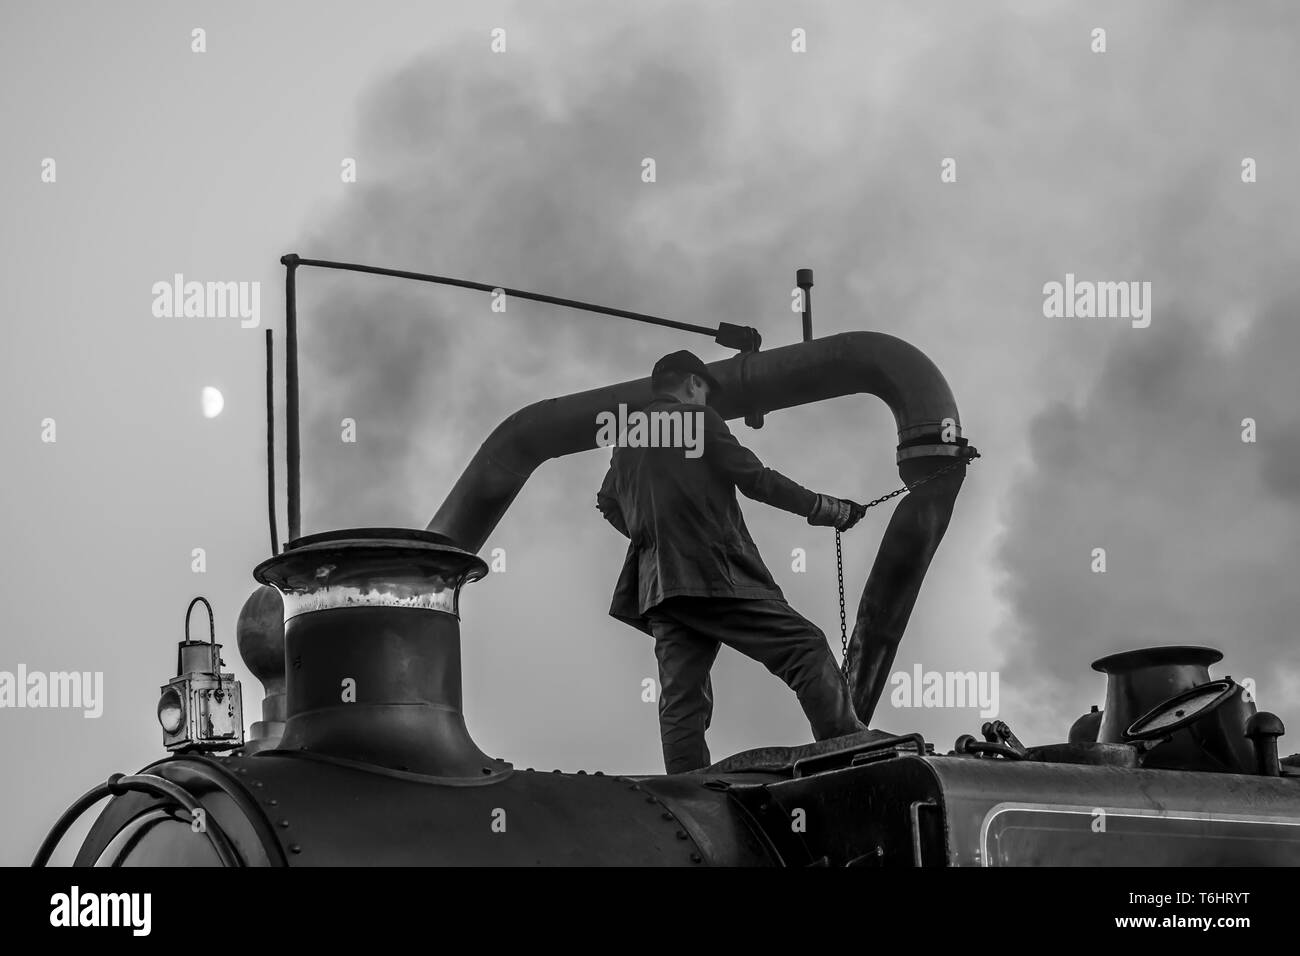 Black & white shot of steam locomotive crew member standing isolated on top of vintage UK steam engine using water crane and filling up water tank. Stock Photo